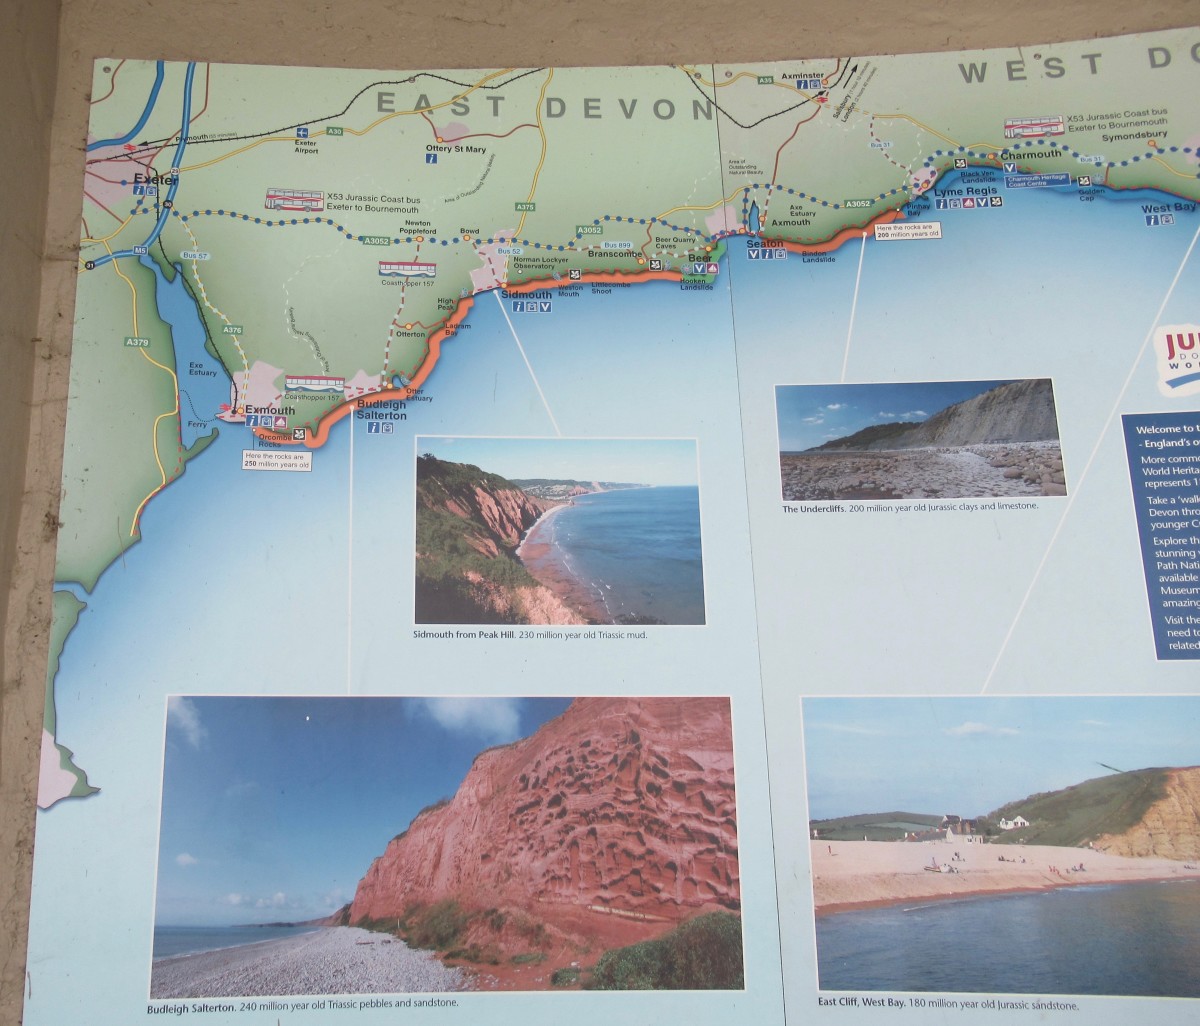 Sidmouth to the west, Seaton (mid-picture) and Lyme Regis to the East